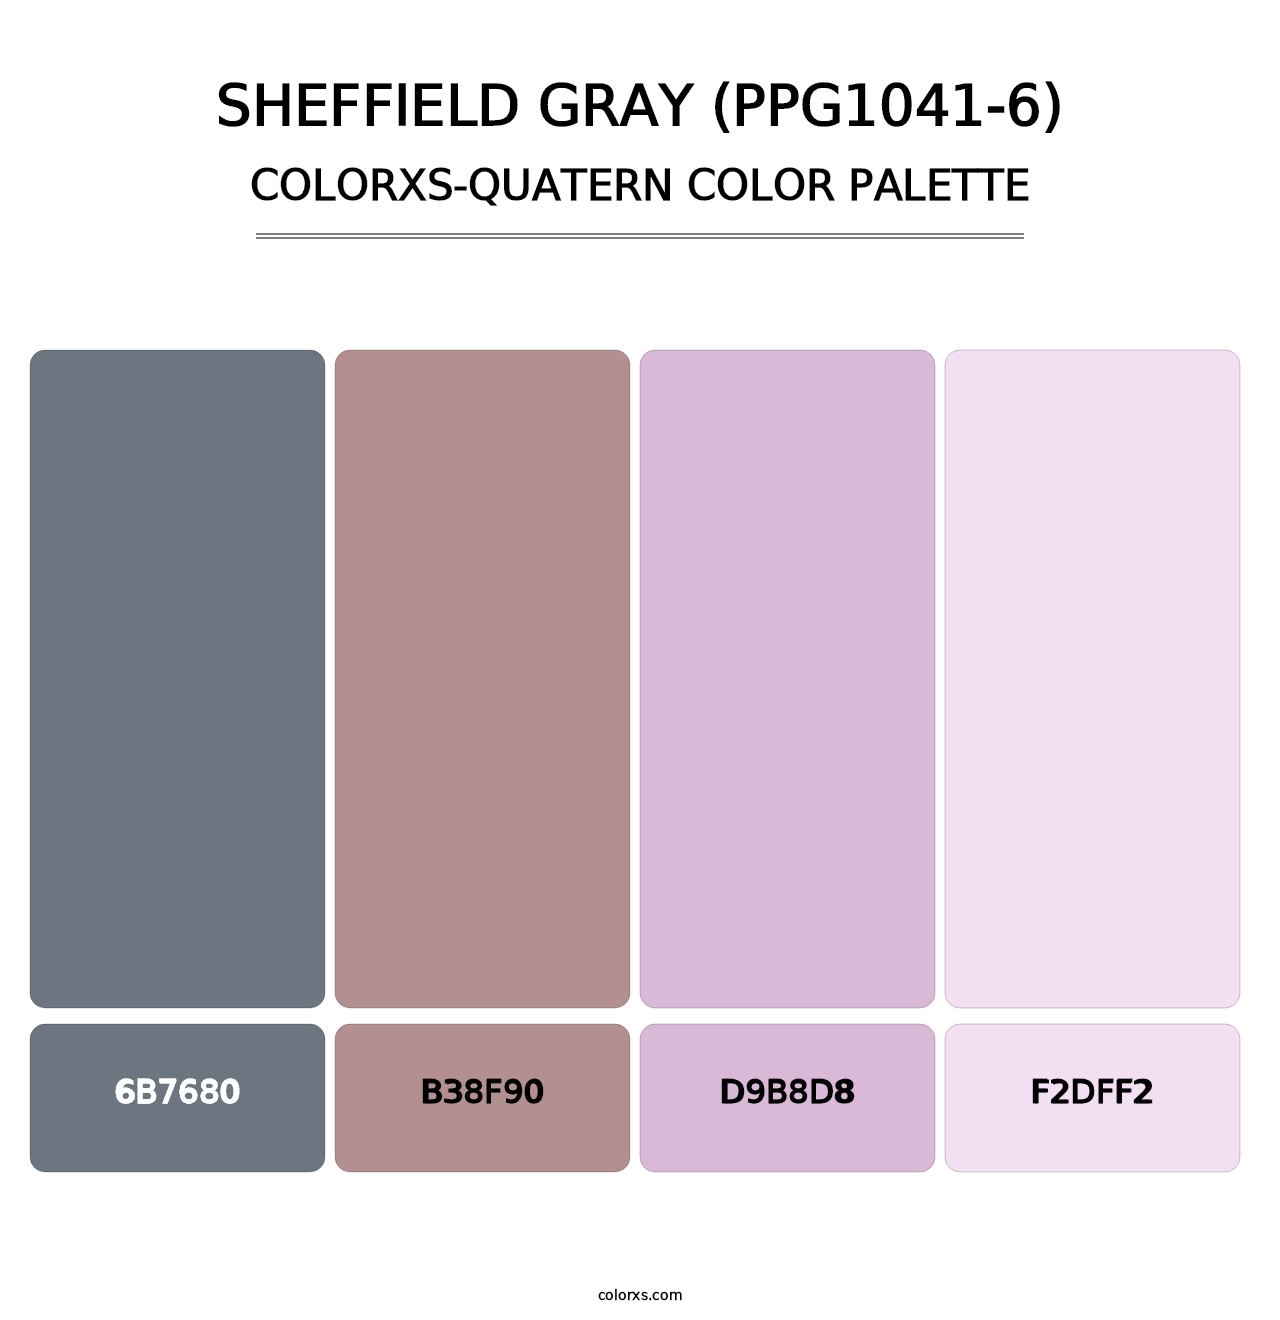 Sheffield Gray (PPG1041-6) - Colorxs Quatern Palette